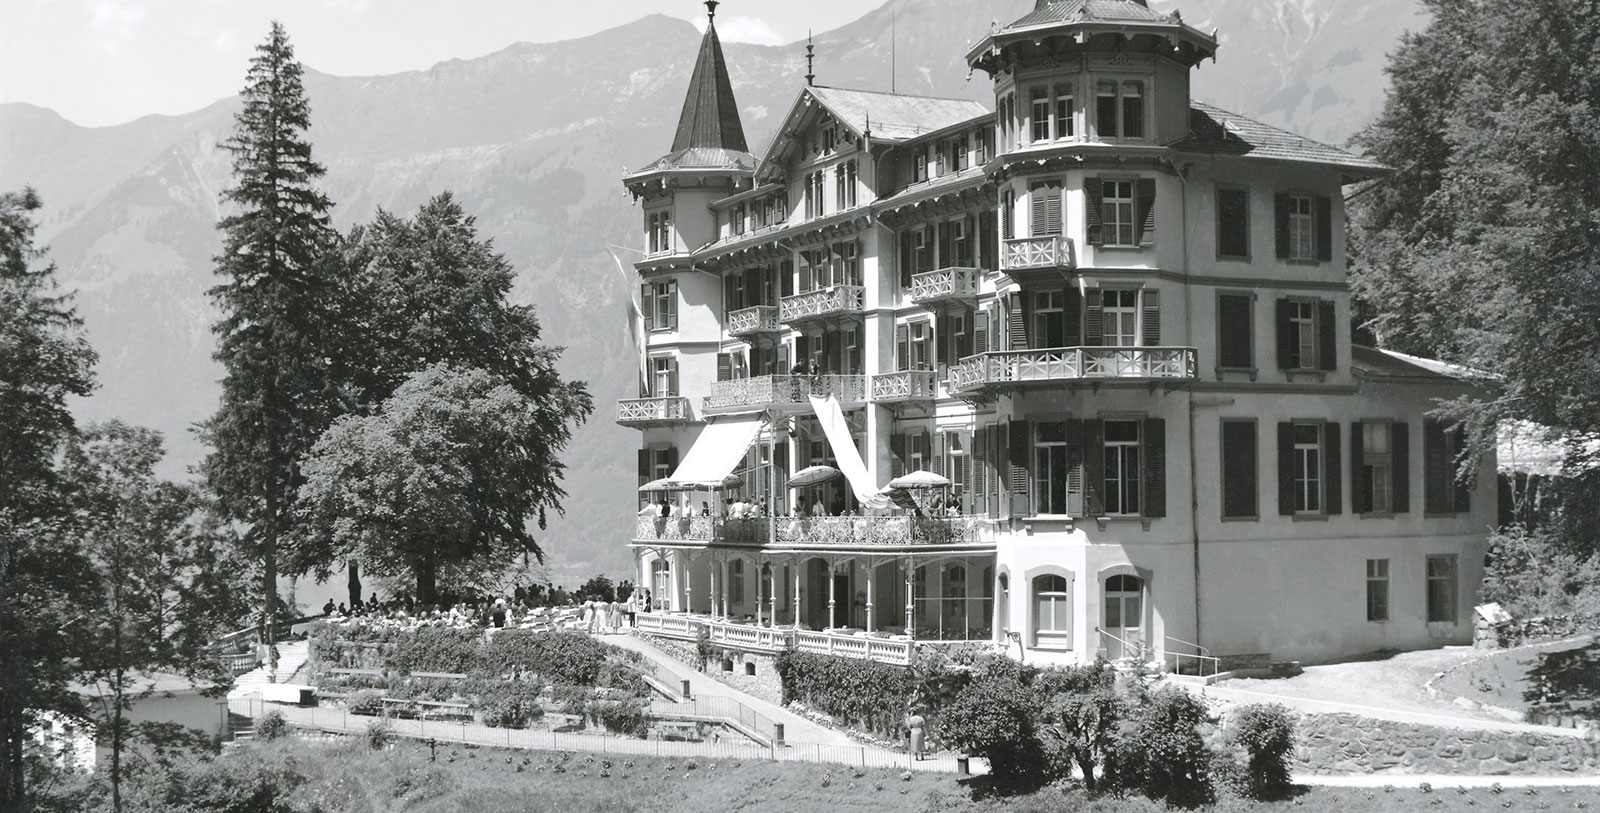 Historic Image of Hotel Exterior, Grandhotel Giessbach, Brienz, Switzerland, 1822, Member of Historic Hotels Worldwide, Discover